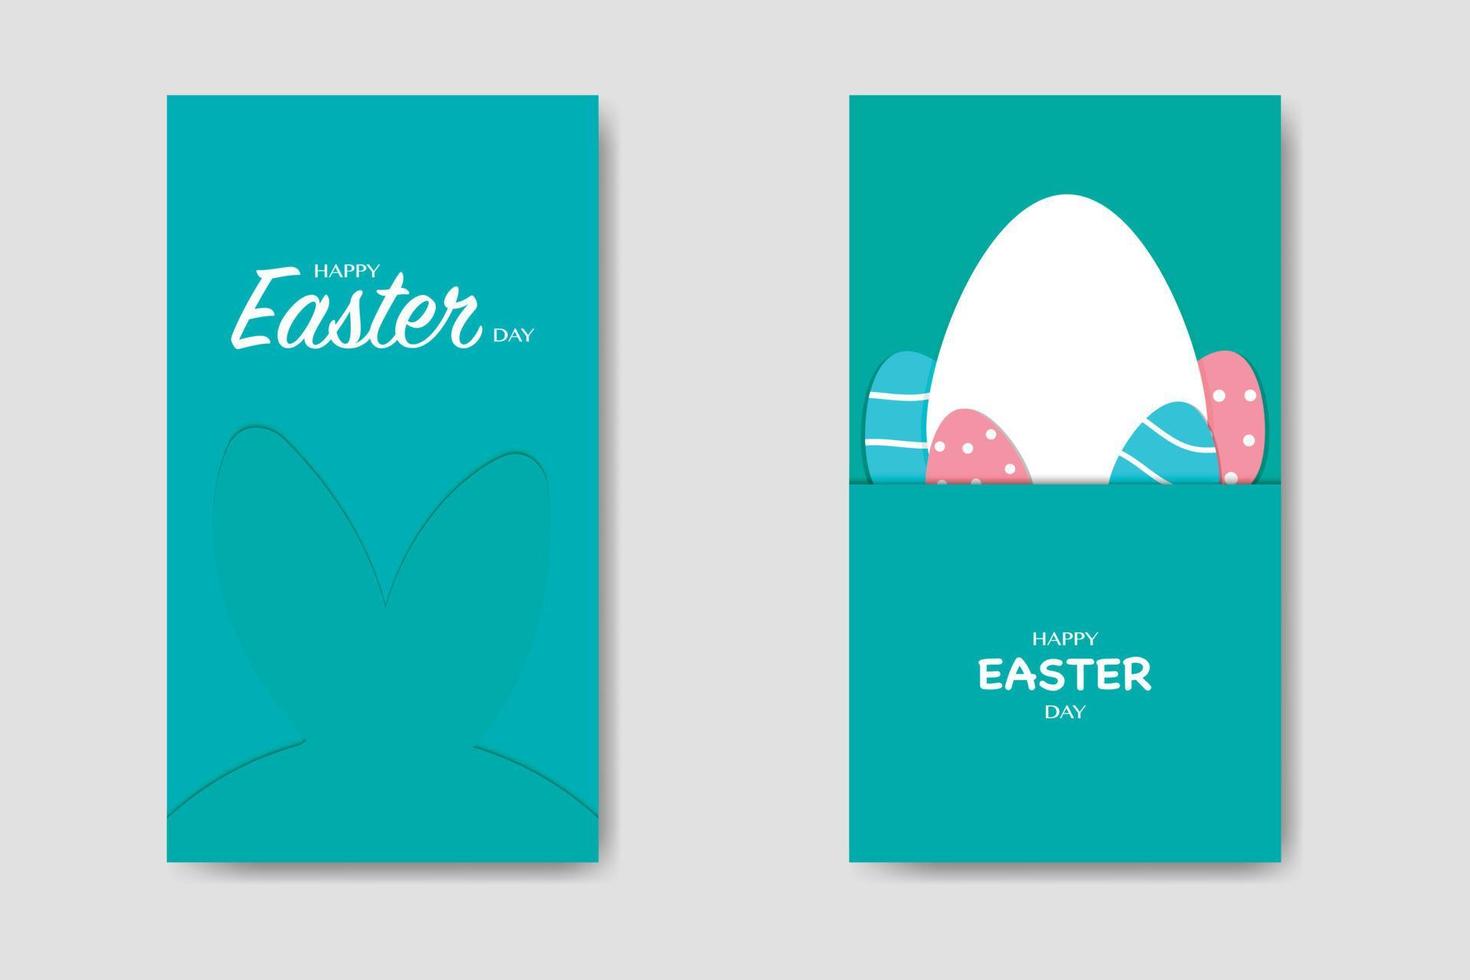 Happy Easter Day Simple Template Bundle vector